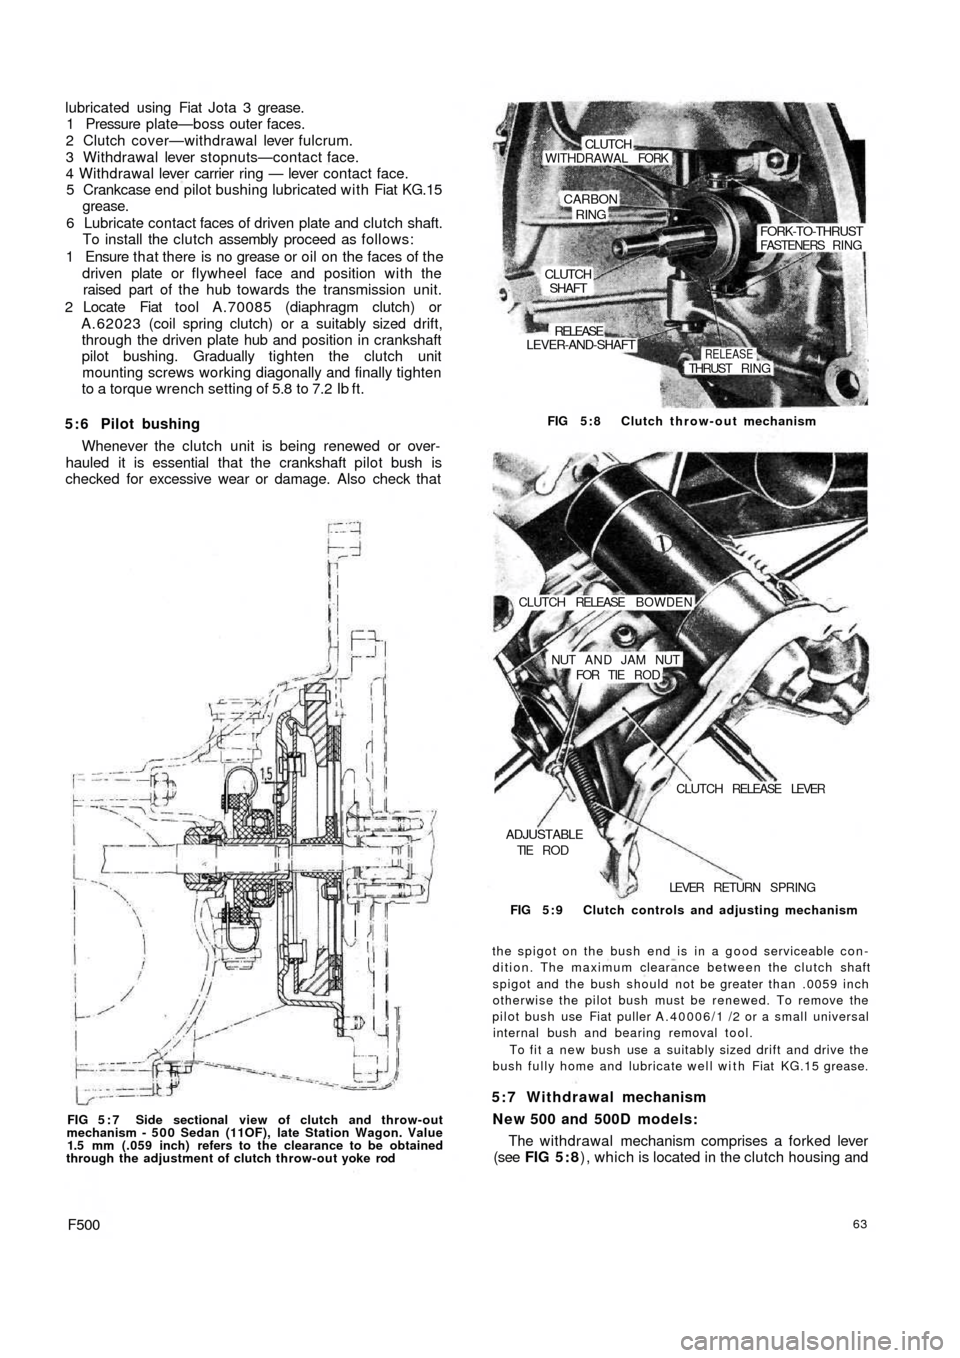 FIAT 500 1971 1.G Repair Manual lubricated using Fiat Jota 3 grease.
1 Pressure plate—boss outer faces.
2 Clutch cover—withdrawal lever fulcrum.
3 Withdrawal lever stopnuts—contact face.
4 Withdrawal lever carrier ring — lev